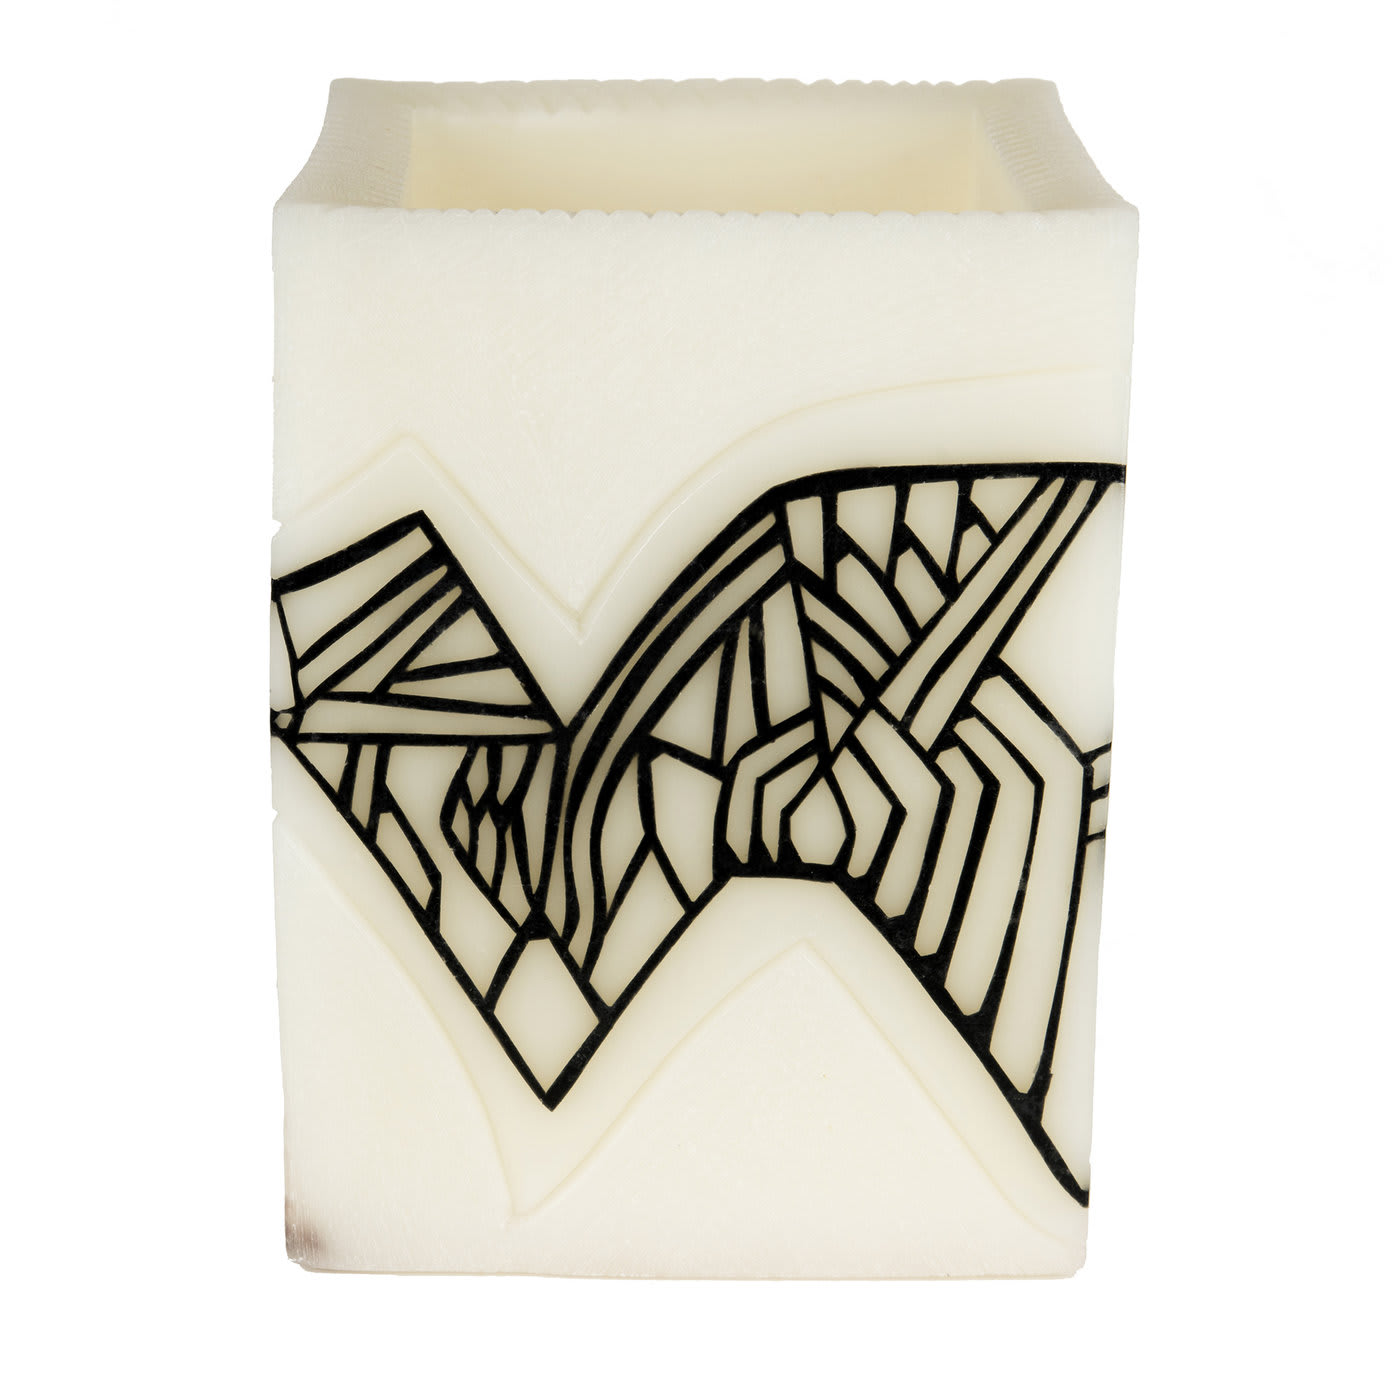 Vanity Cube Candle - Candle Store